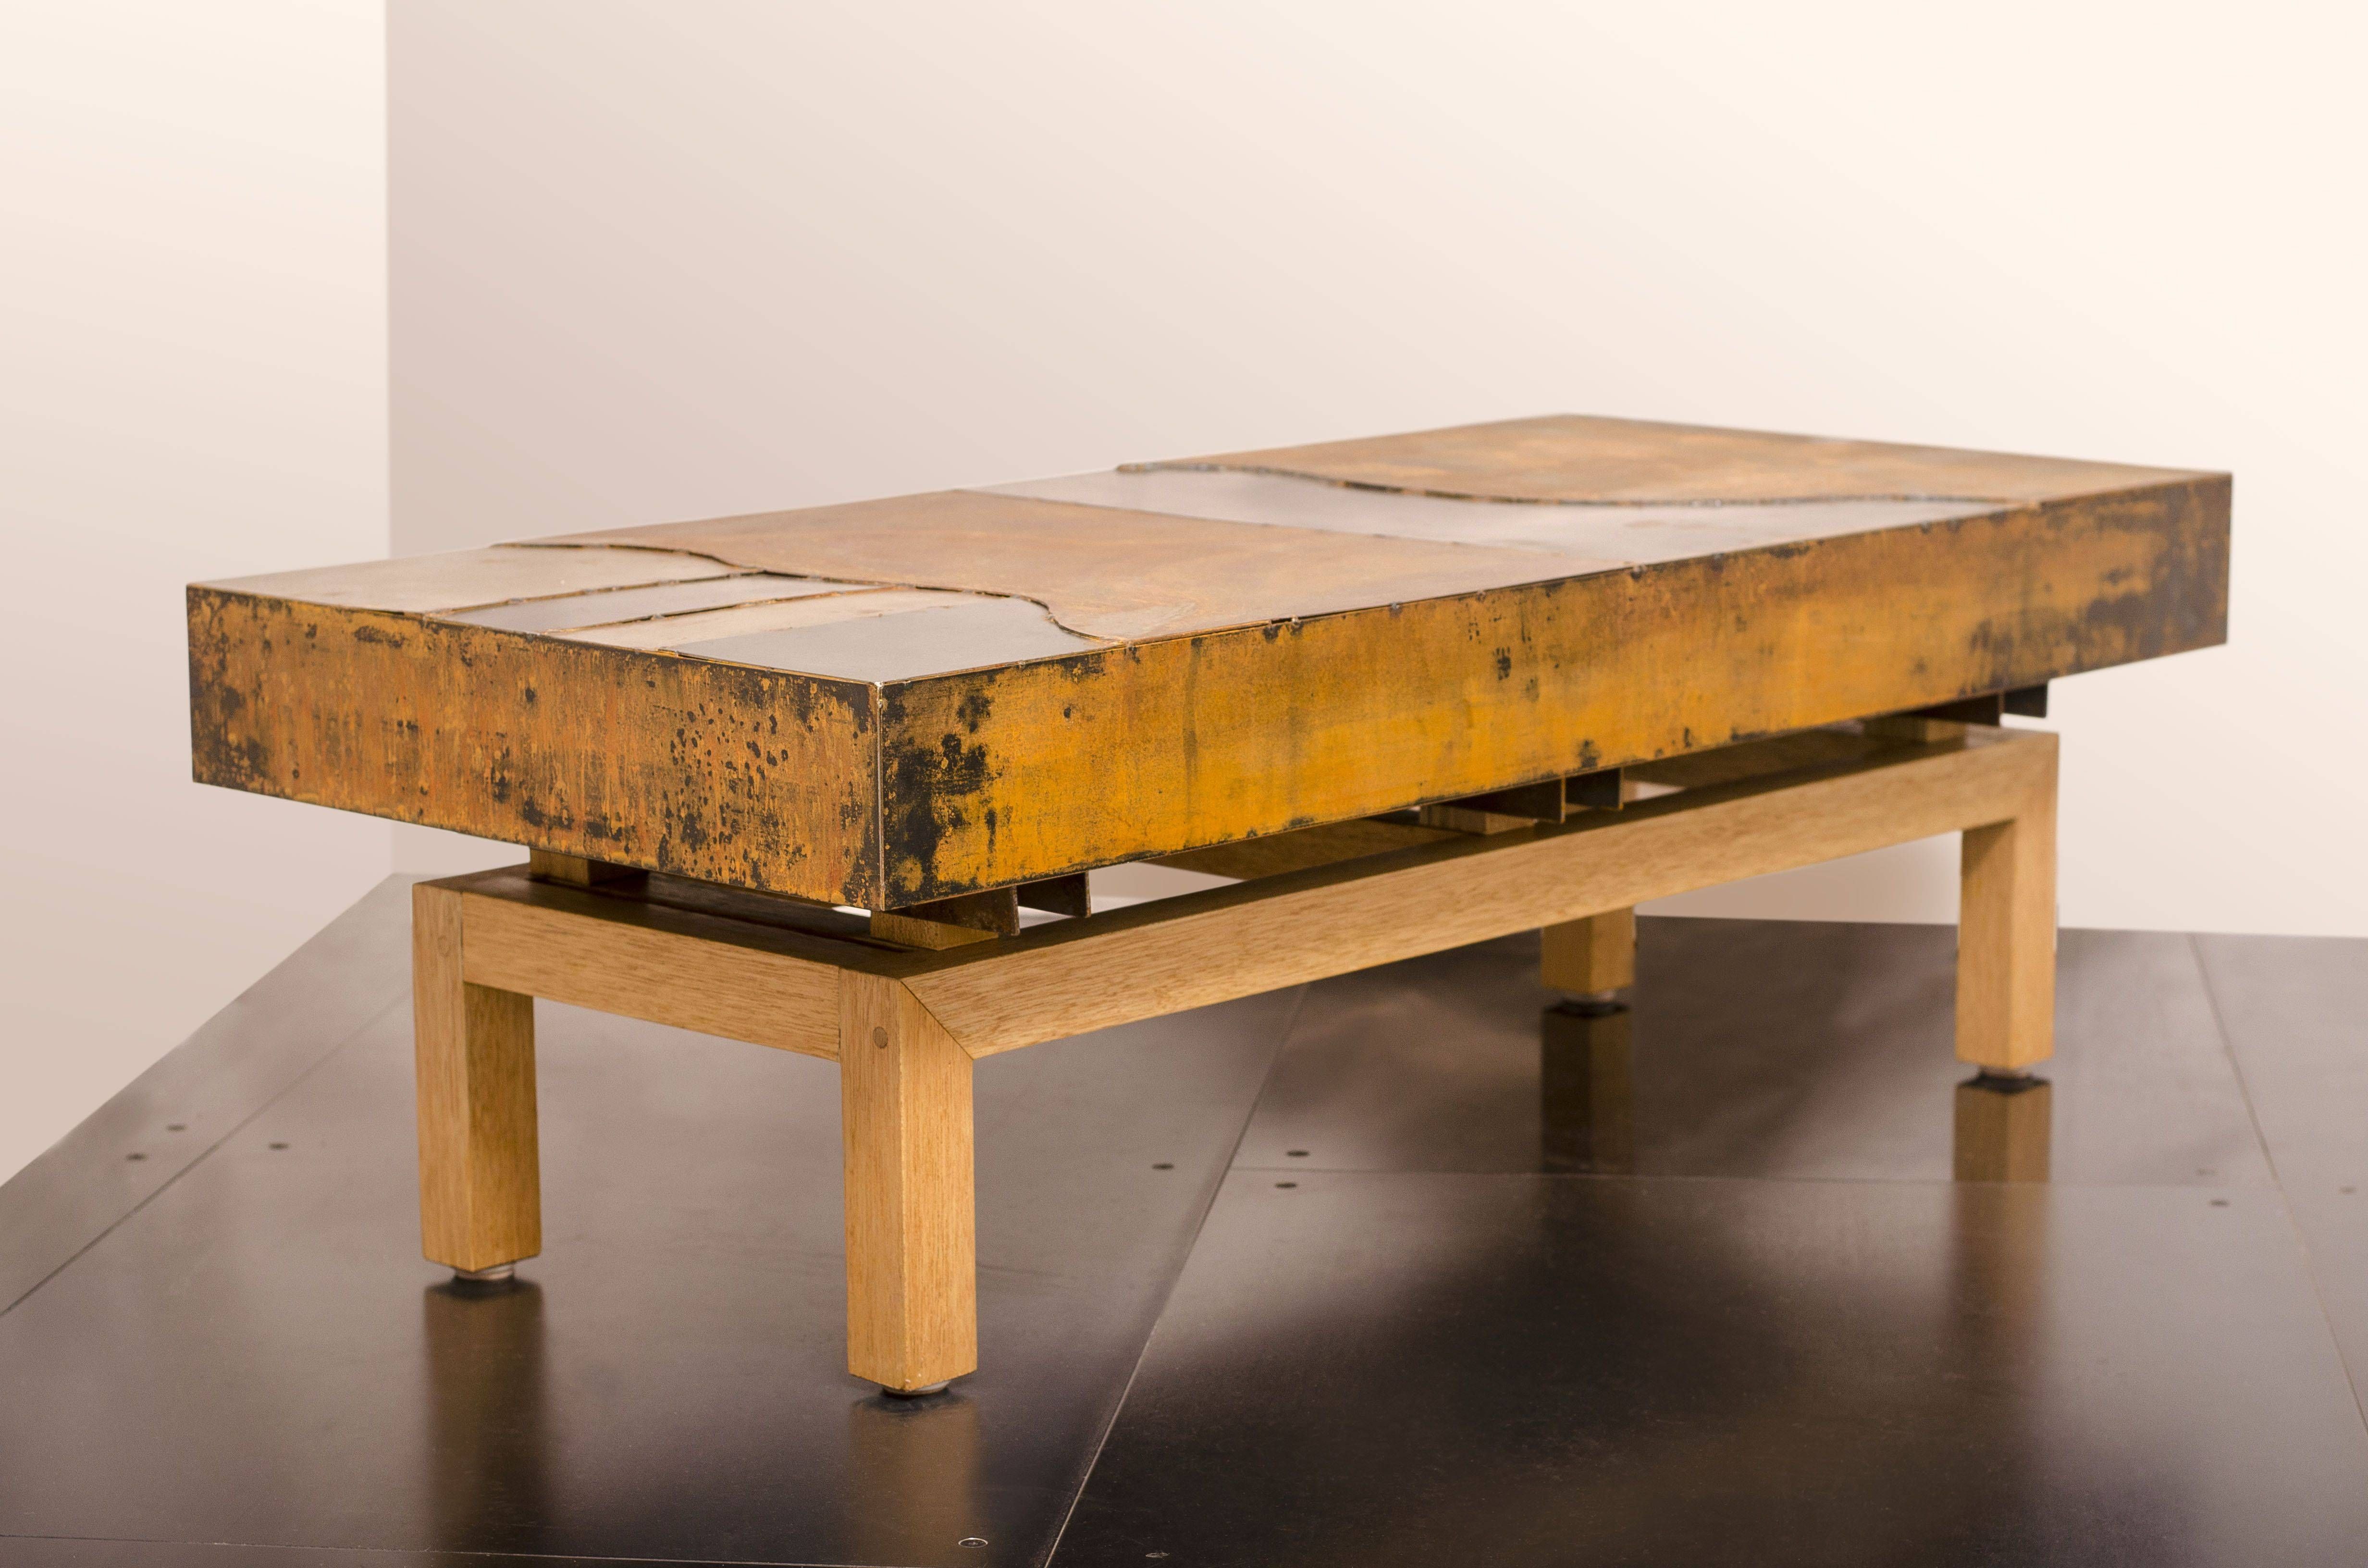 Hand Crafted Industrial Steel Coffee Table | Metal Mix Graft, Wood Inside Steel And Wood Coffee Tables (View 15 of 15)